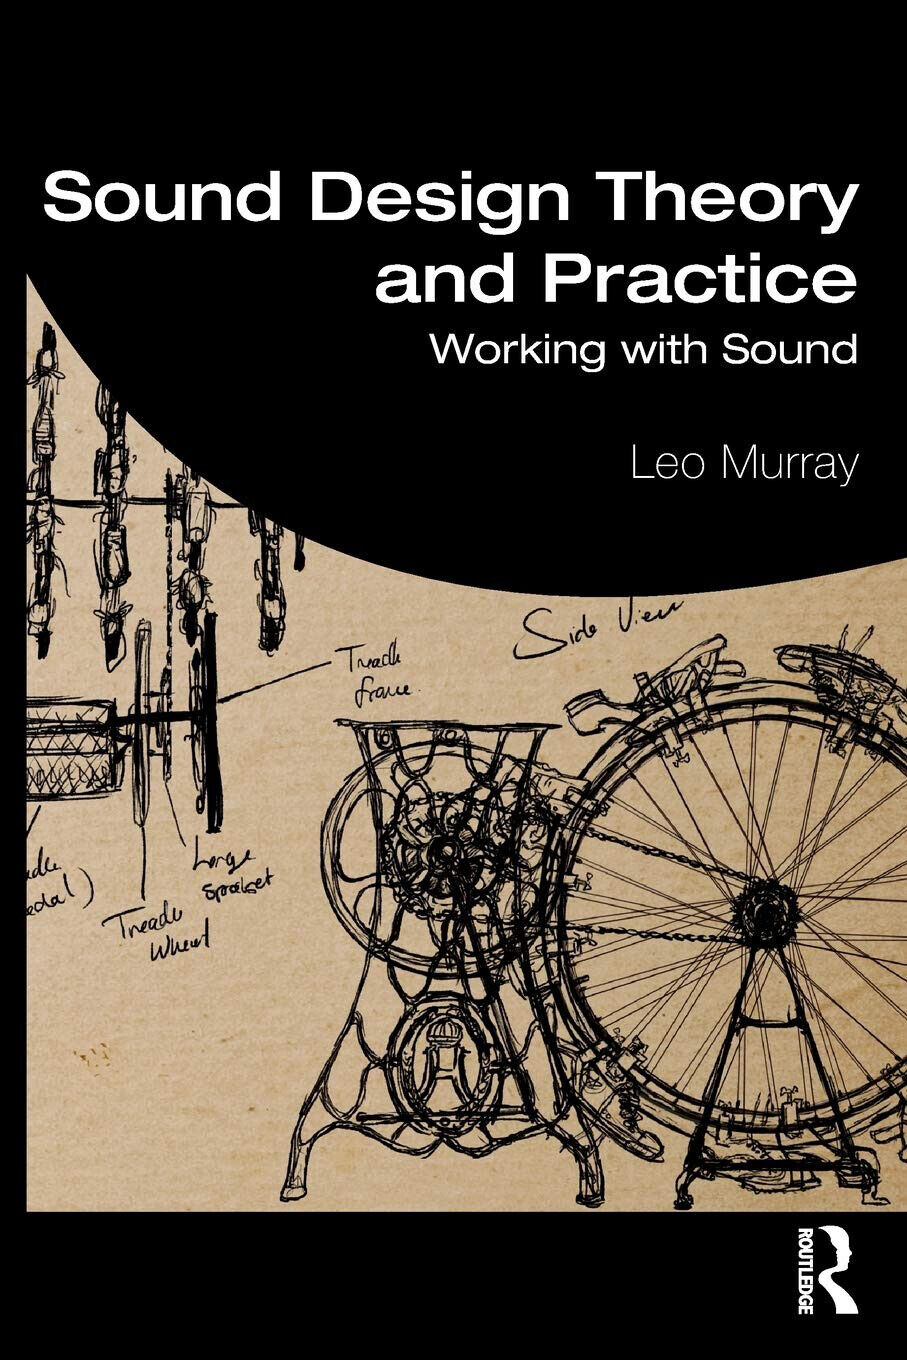 Sound Theory from Sound Practice - Leo Murray - Routledge, 2019 libro usato